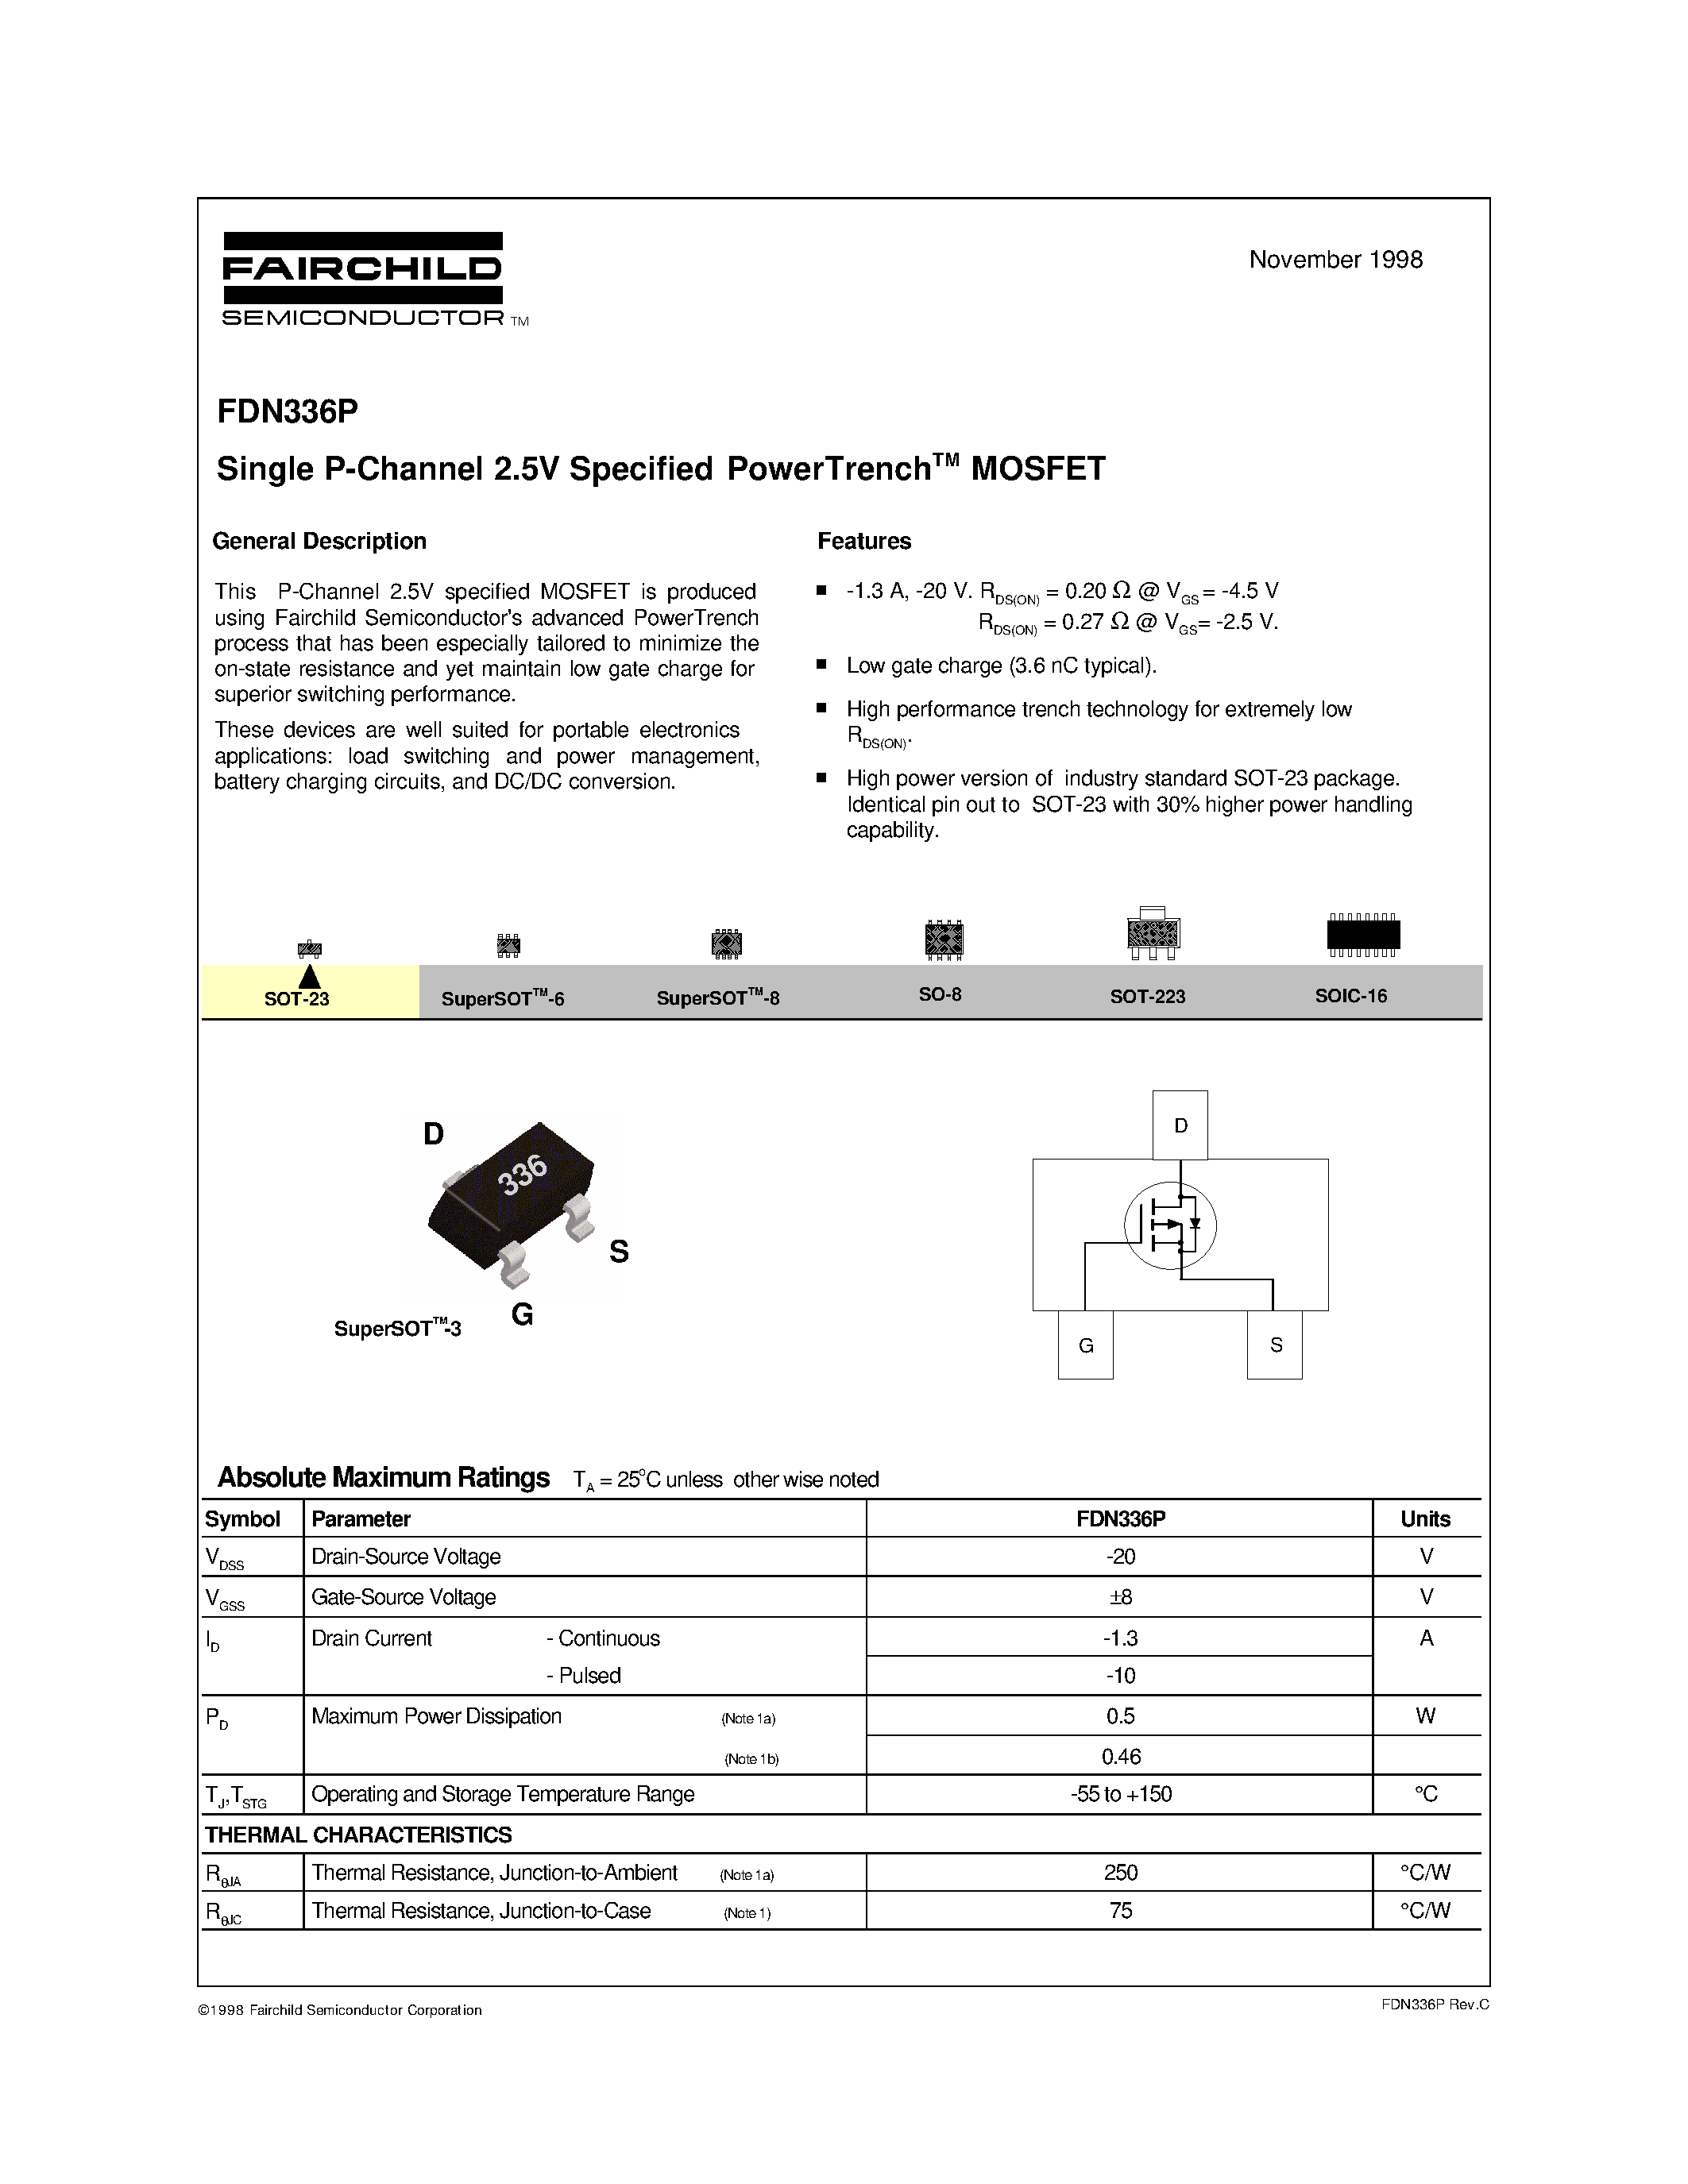 Даташит FDN336P - Single P-Channel 2.5V Specified PowerTrenchTM MOSFET страница 1